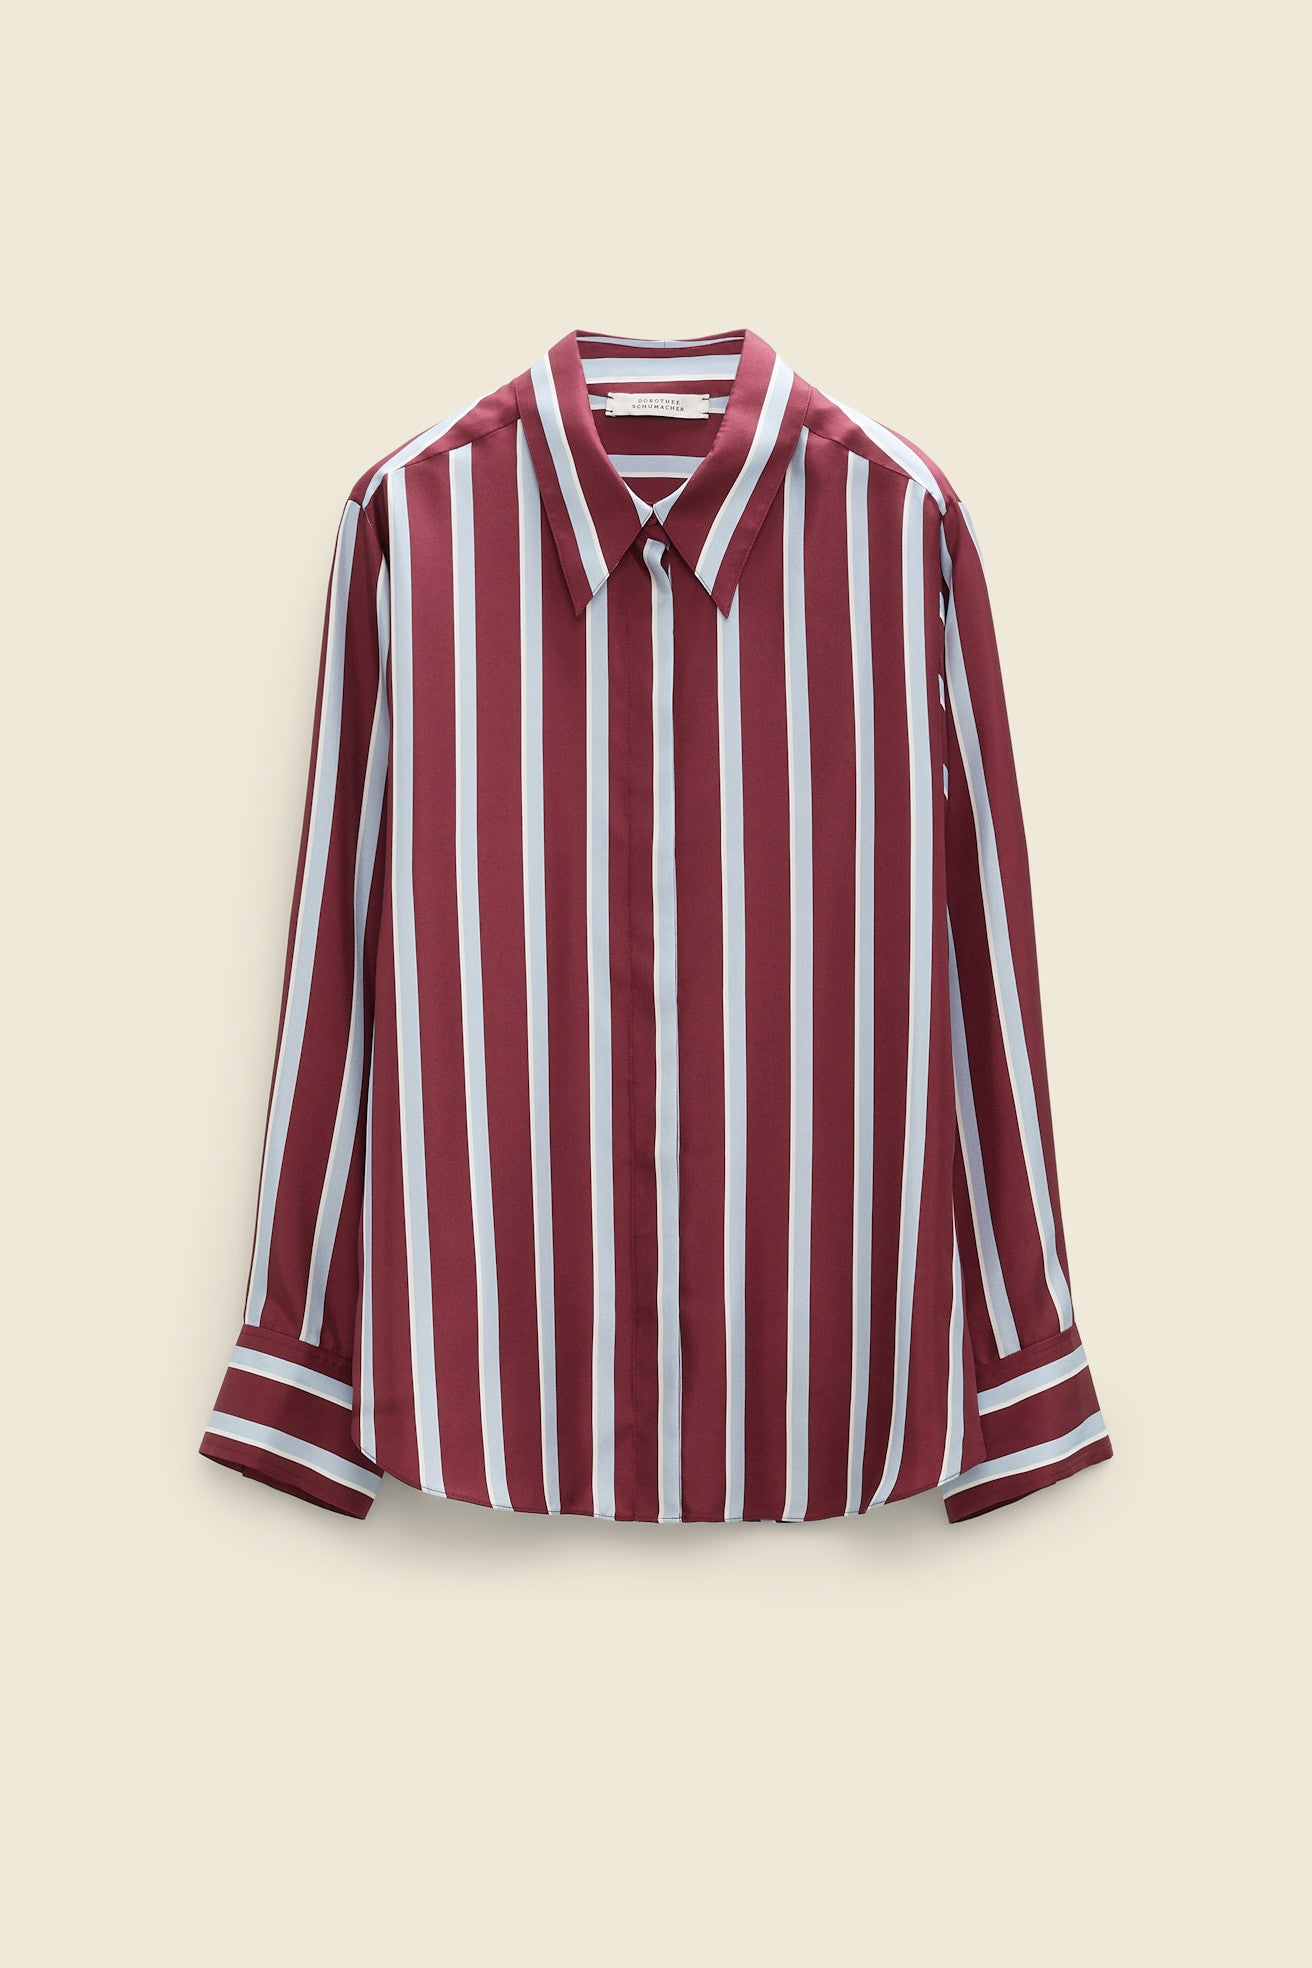 Luxurious stripes blouse by Dorothee Schumacher